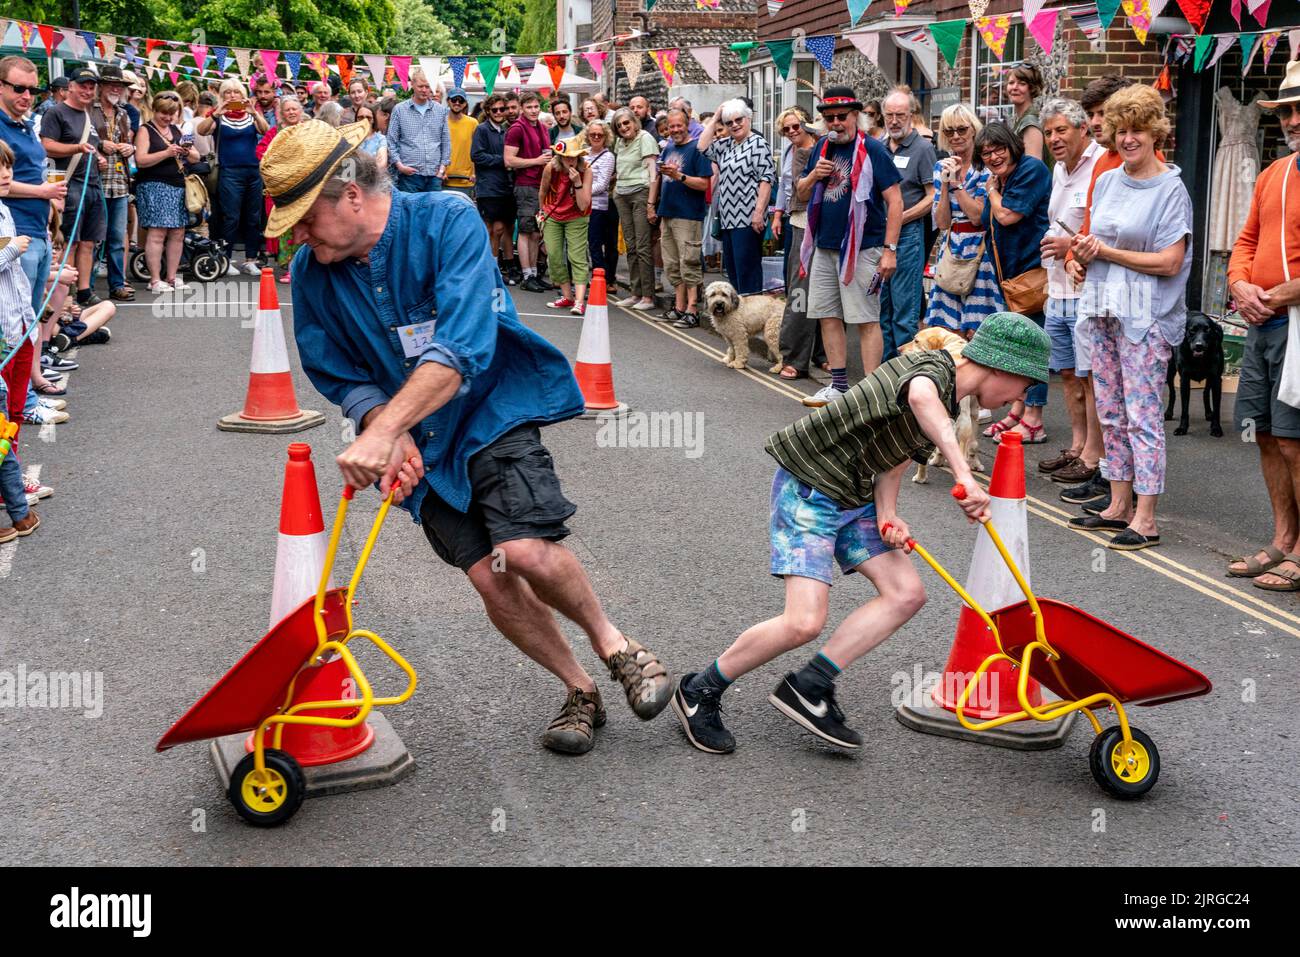 Locals Take Part In Wheelbarrow Racing During The South Street Bonfire Society's Annual Sports Day, Lewes, East Sussex, UK. Stock Photo